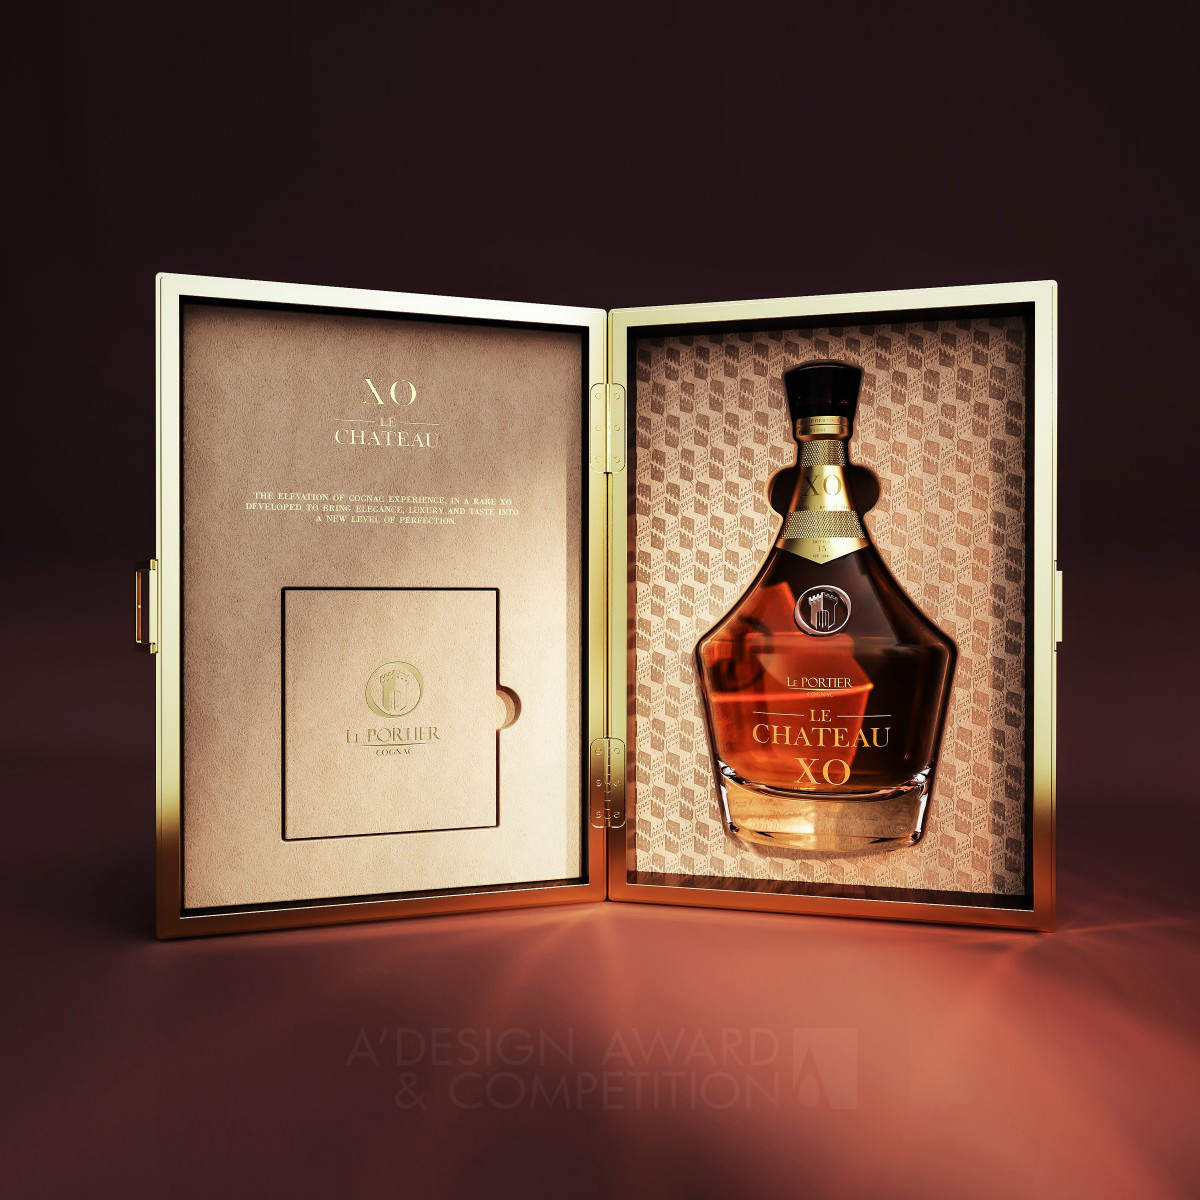 Tiago Russo wins Silver at the prestigious A' Packaging Design Award with Le Chateau XO Luxury Cognac.